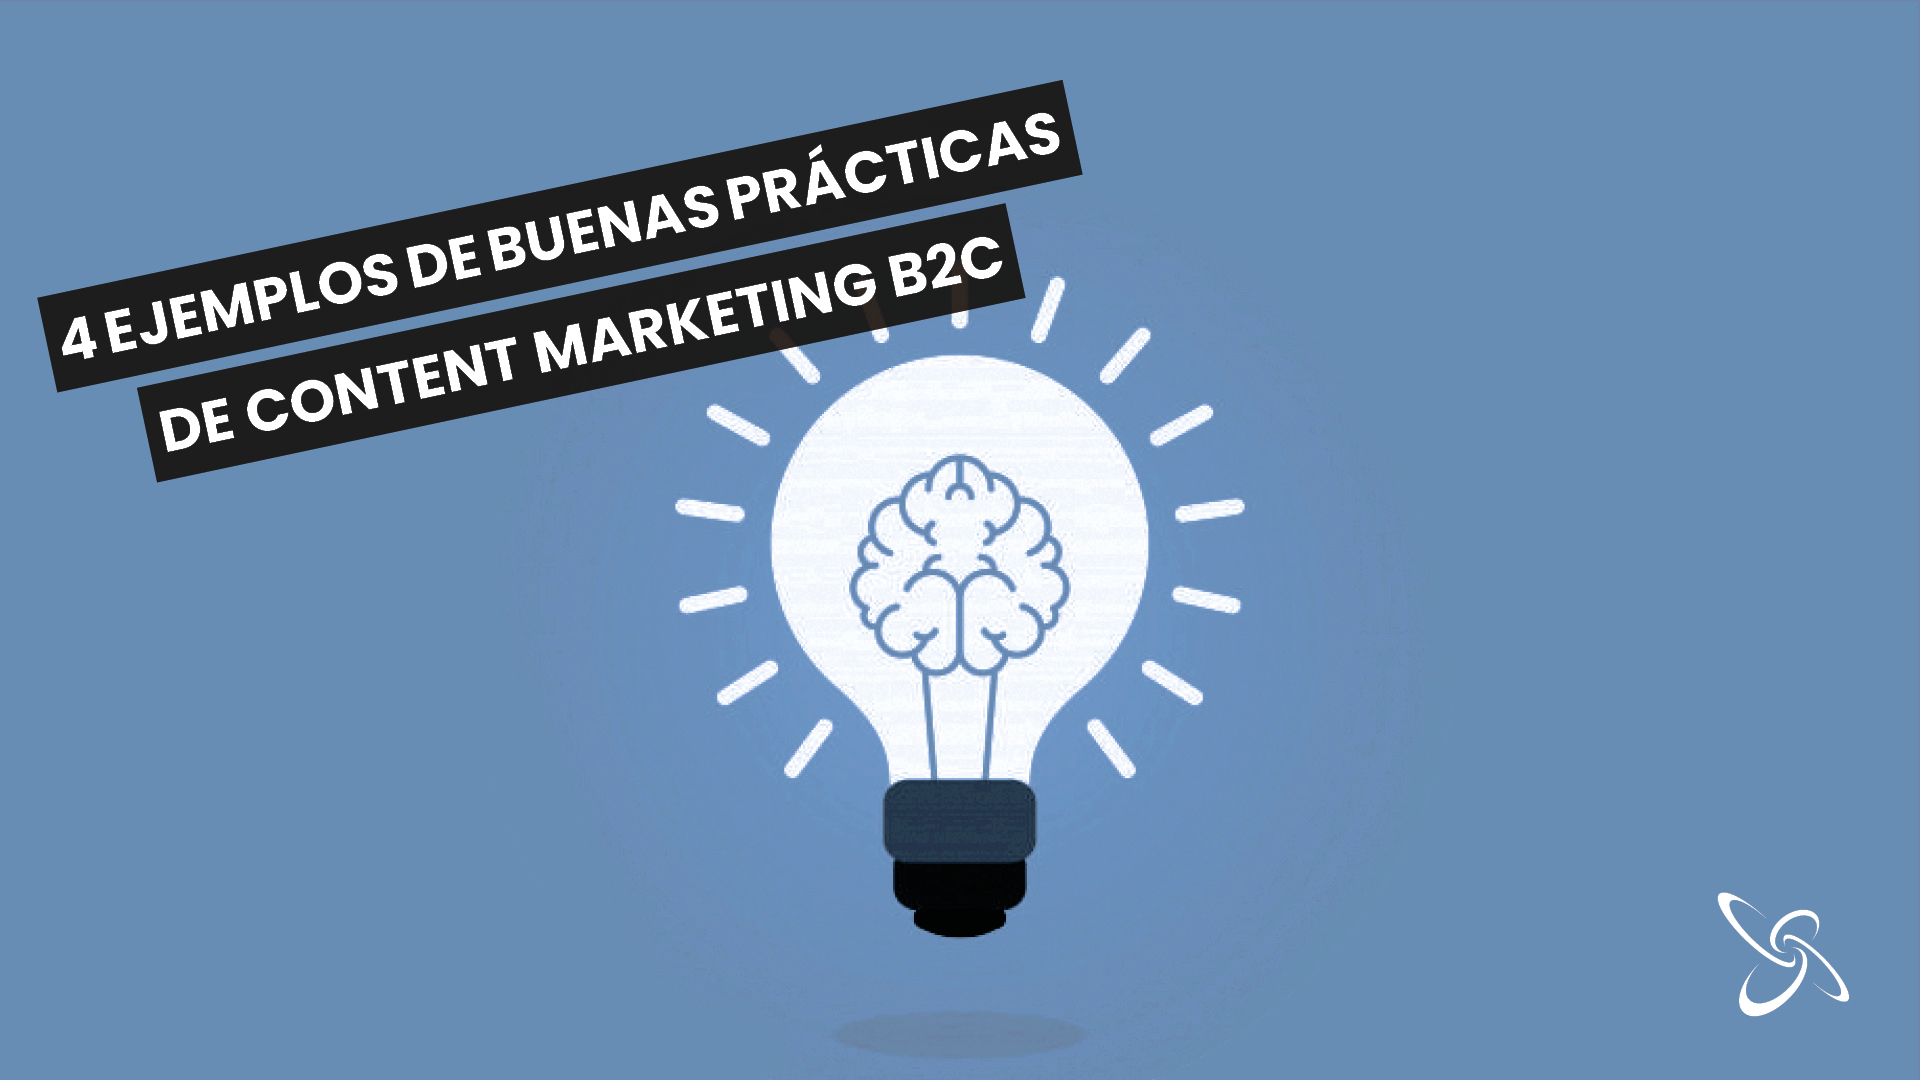 4 examples of good B2C content marketing practices for your business